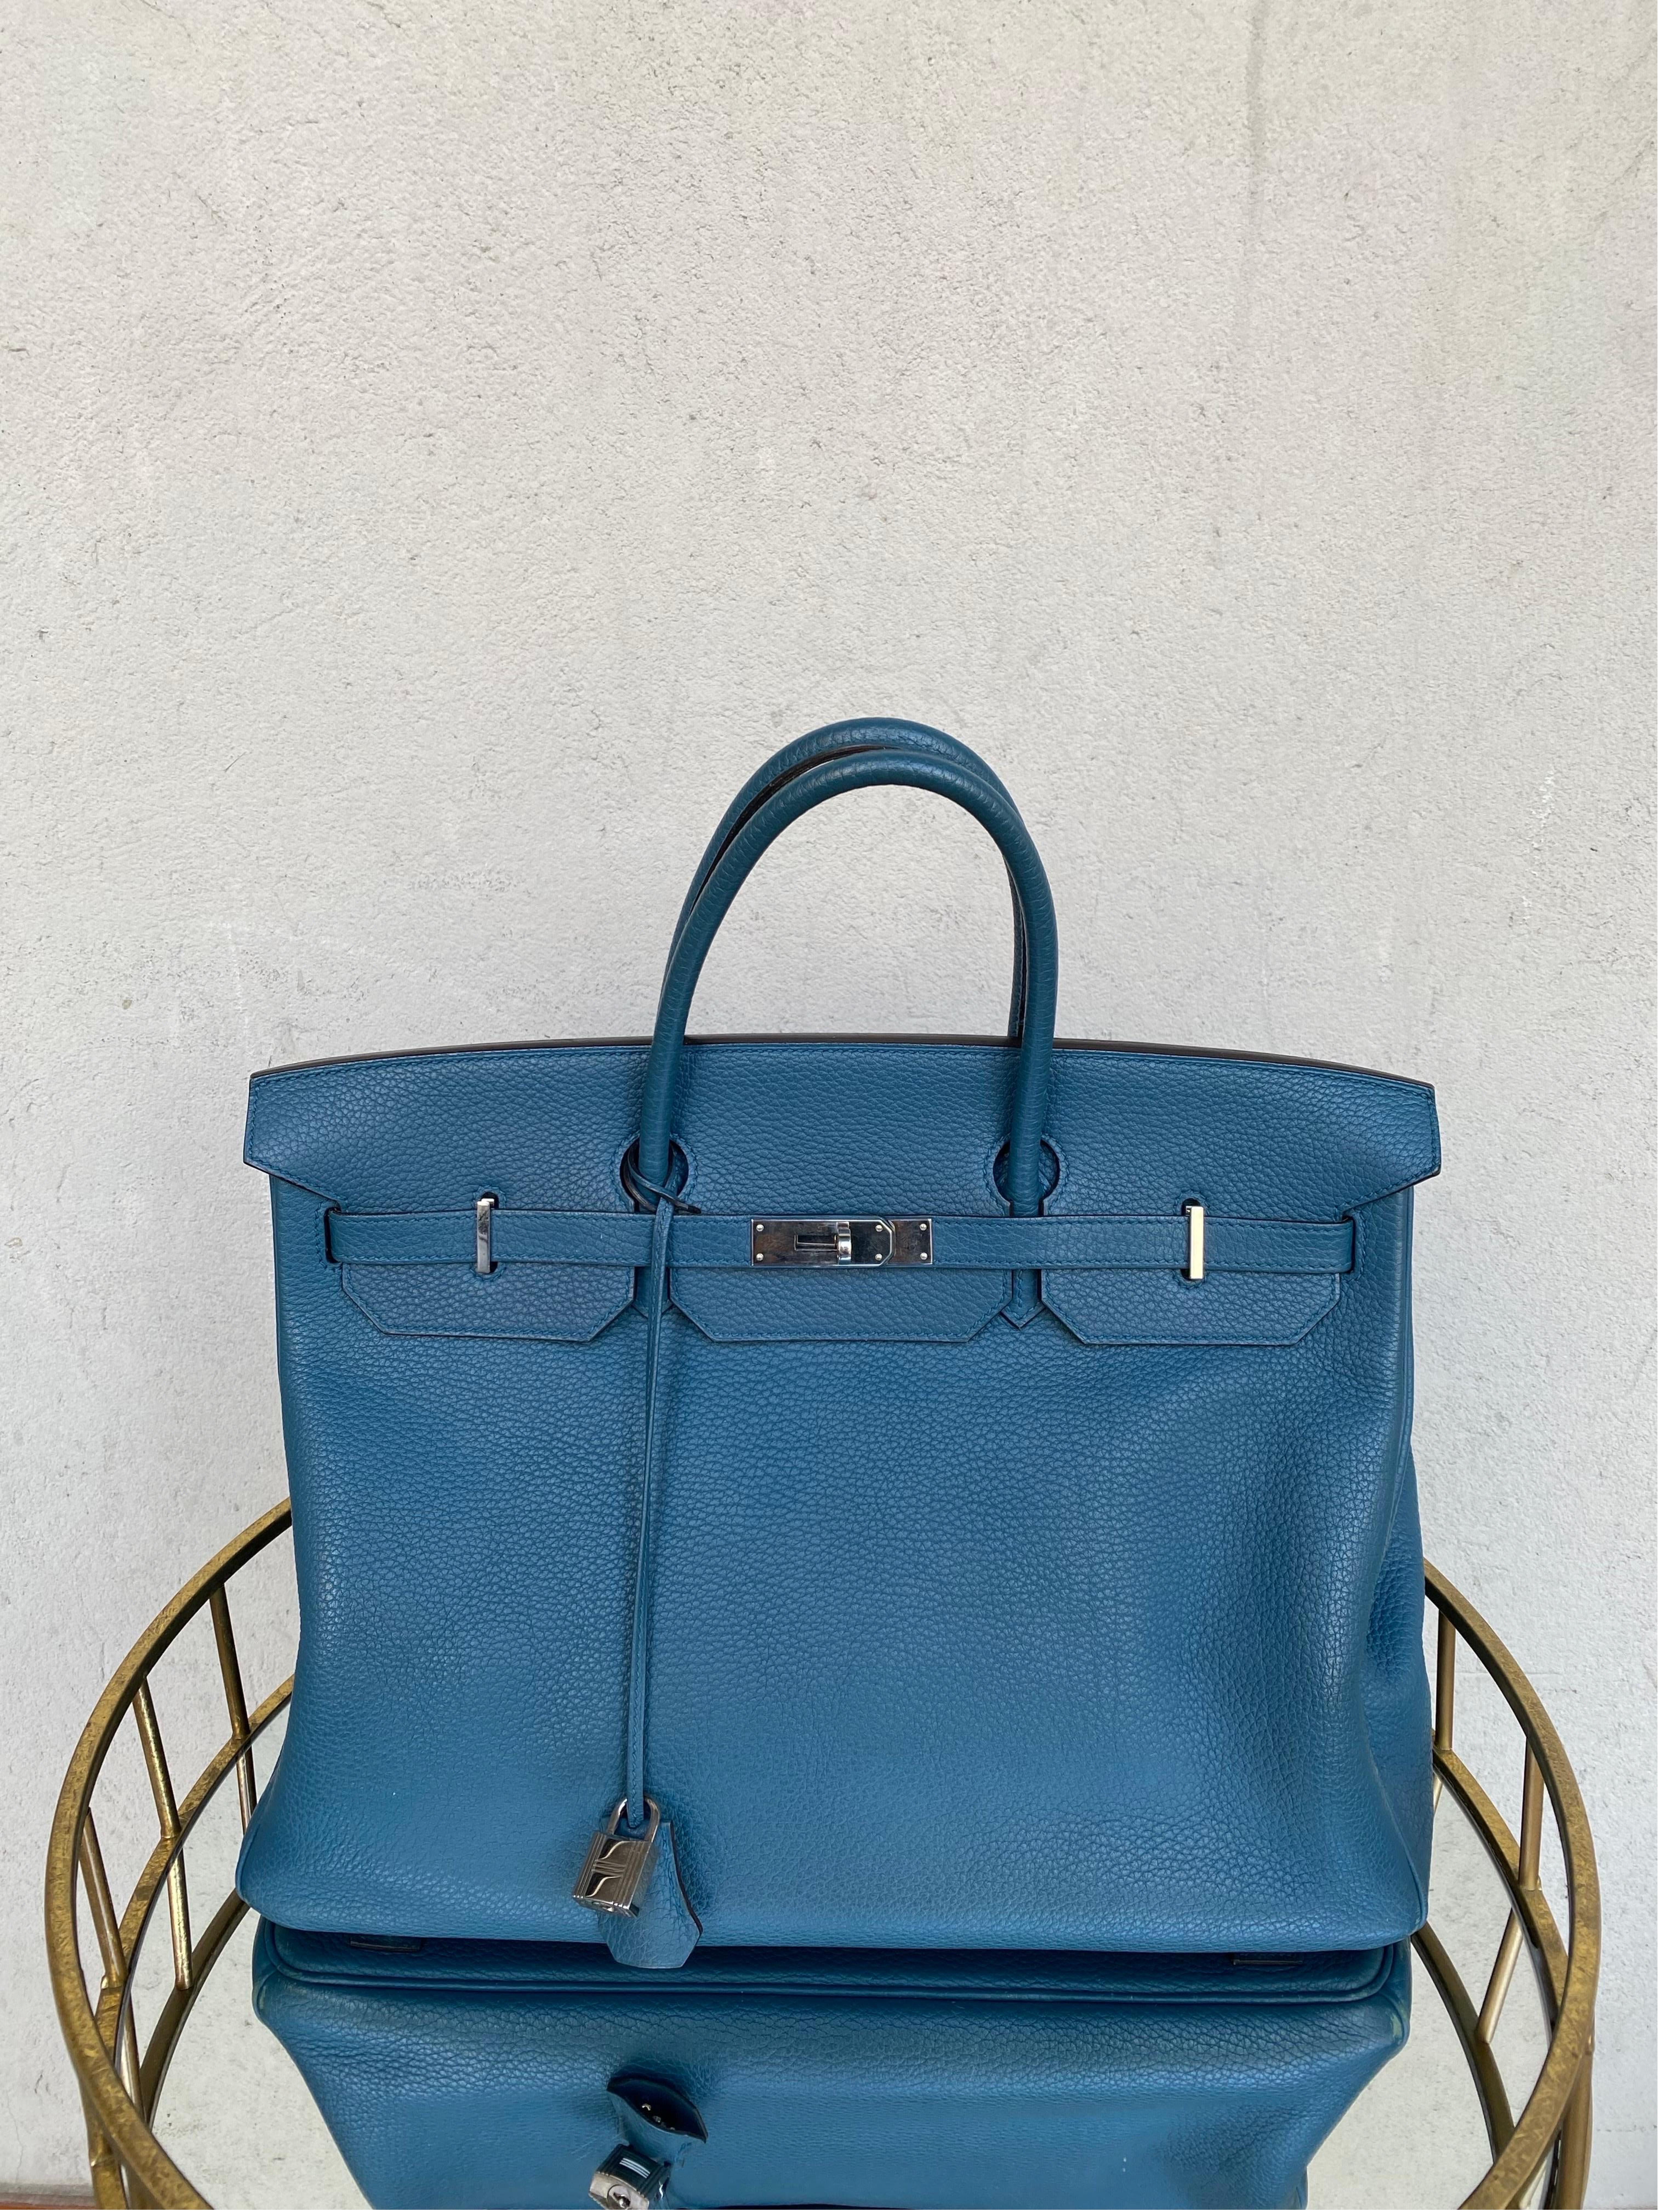 Hermes Birkin bag. Year 2005/2006.
In cobalt Togo leather and silver hardware.
The hardware has some marks as shown in the photo.
Code J*122.E
28cm high
40cm wide
20cm deep
Inside it has 2 pockets, one of which closes with a zip.
Excellent general